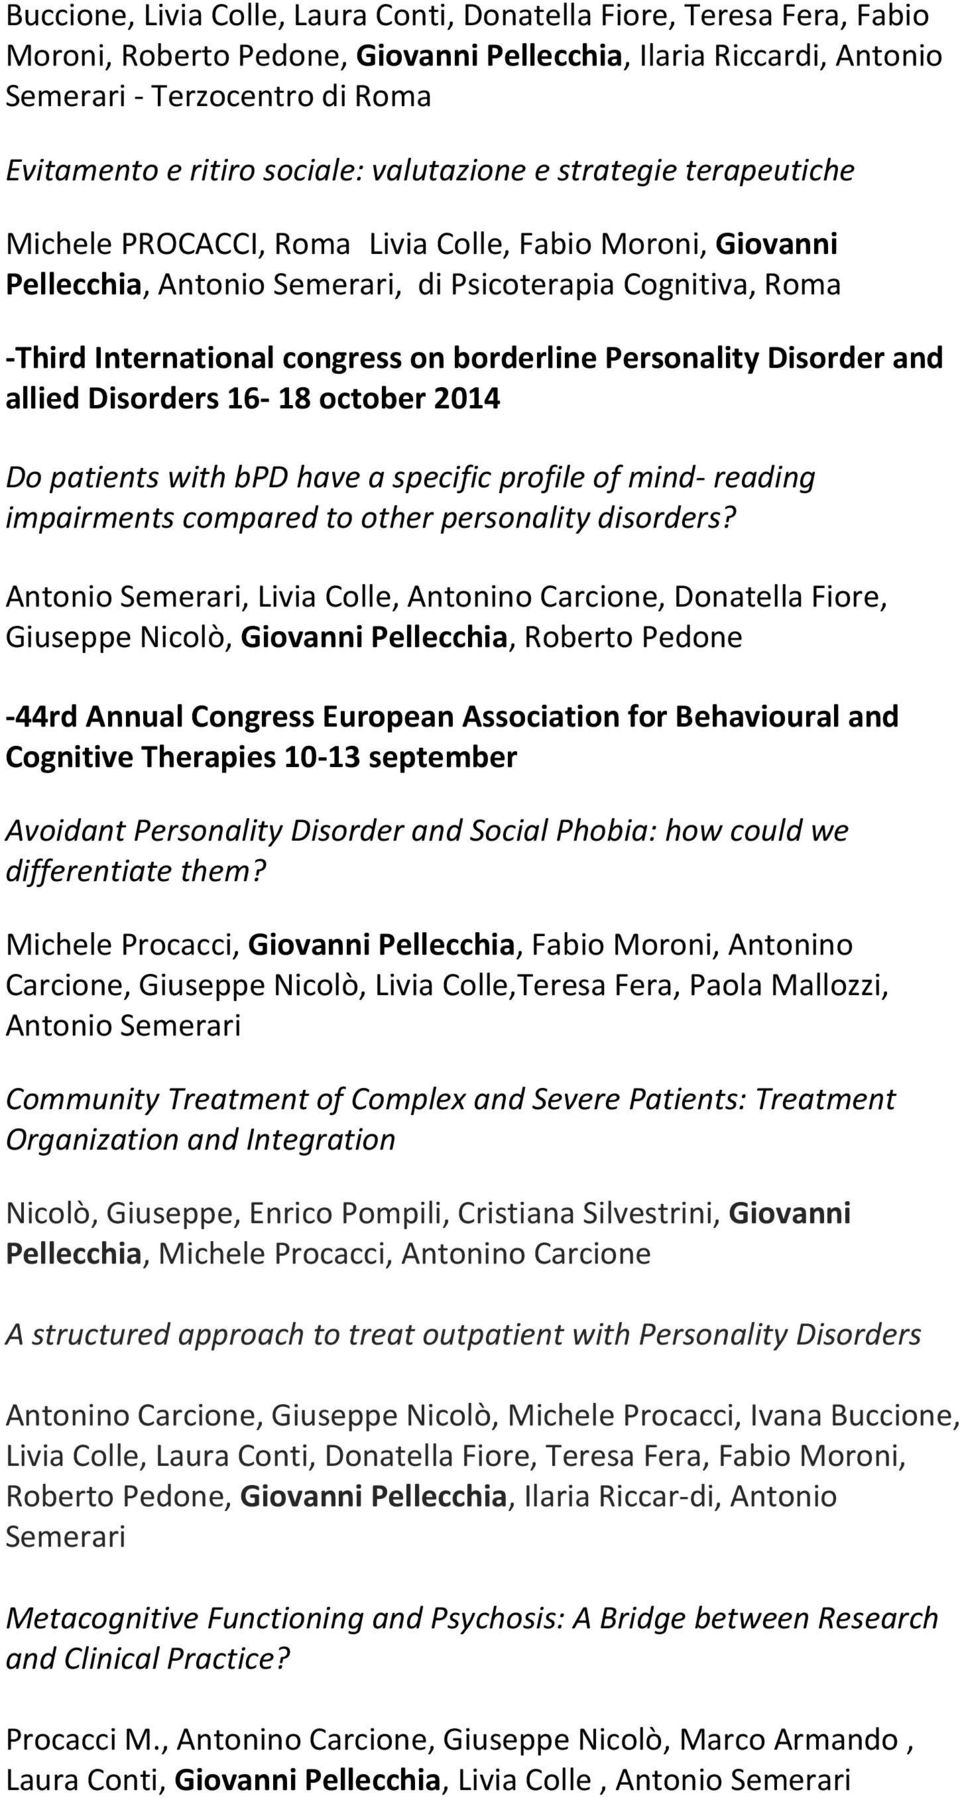 borderline Personality Disorder and allied Disorders 16-18 october 2014 Do patients with bpd have a specific profile of mind- reading impairments compared to other personality disorders?